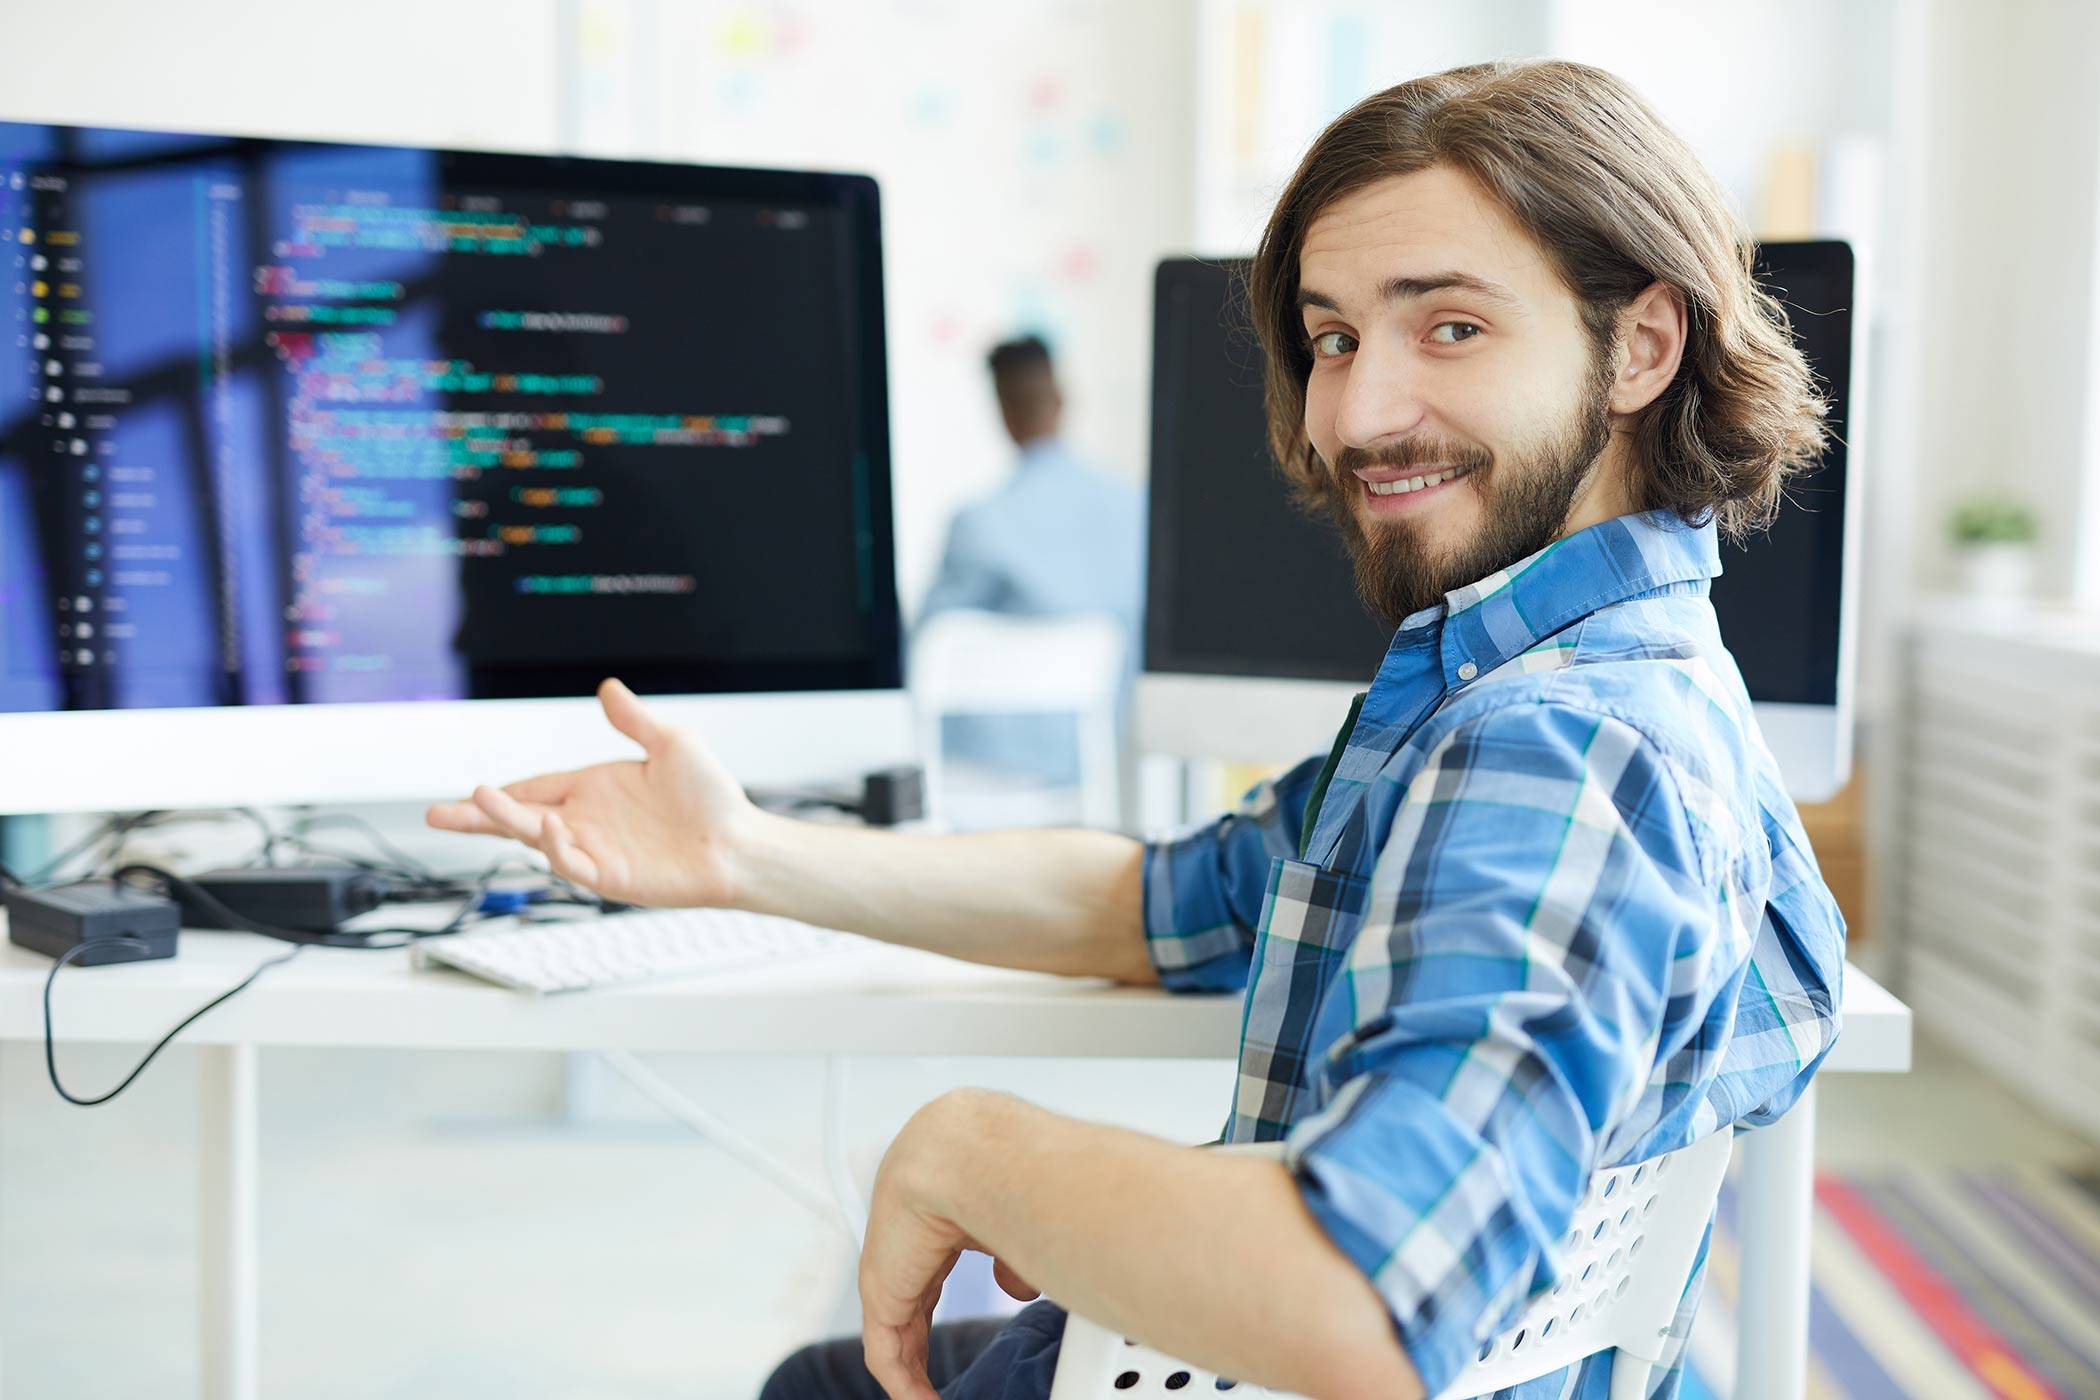 developer smiling and showing his code to the camera